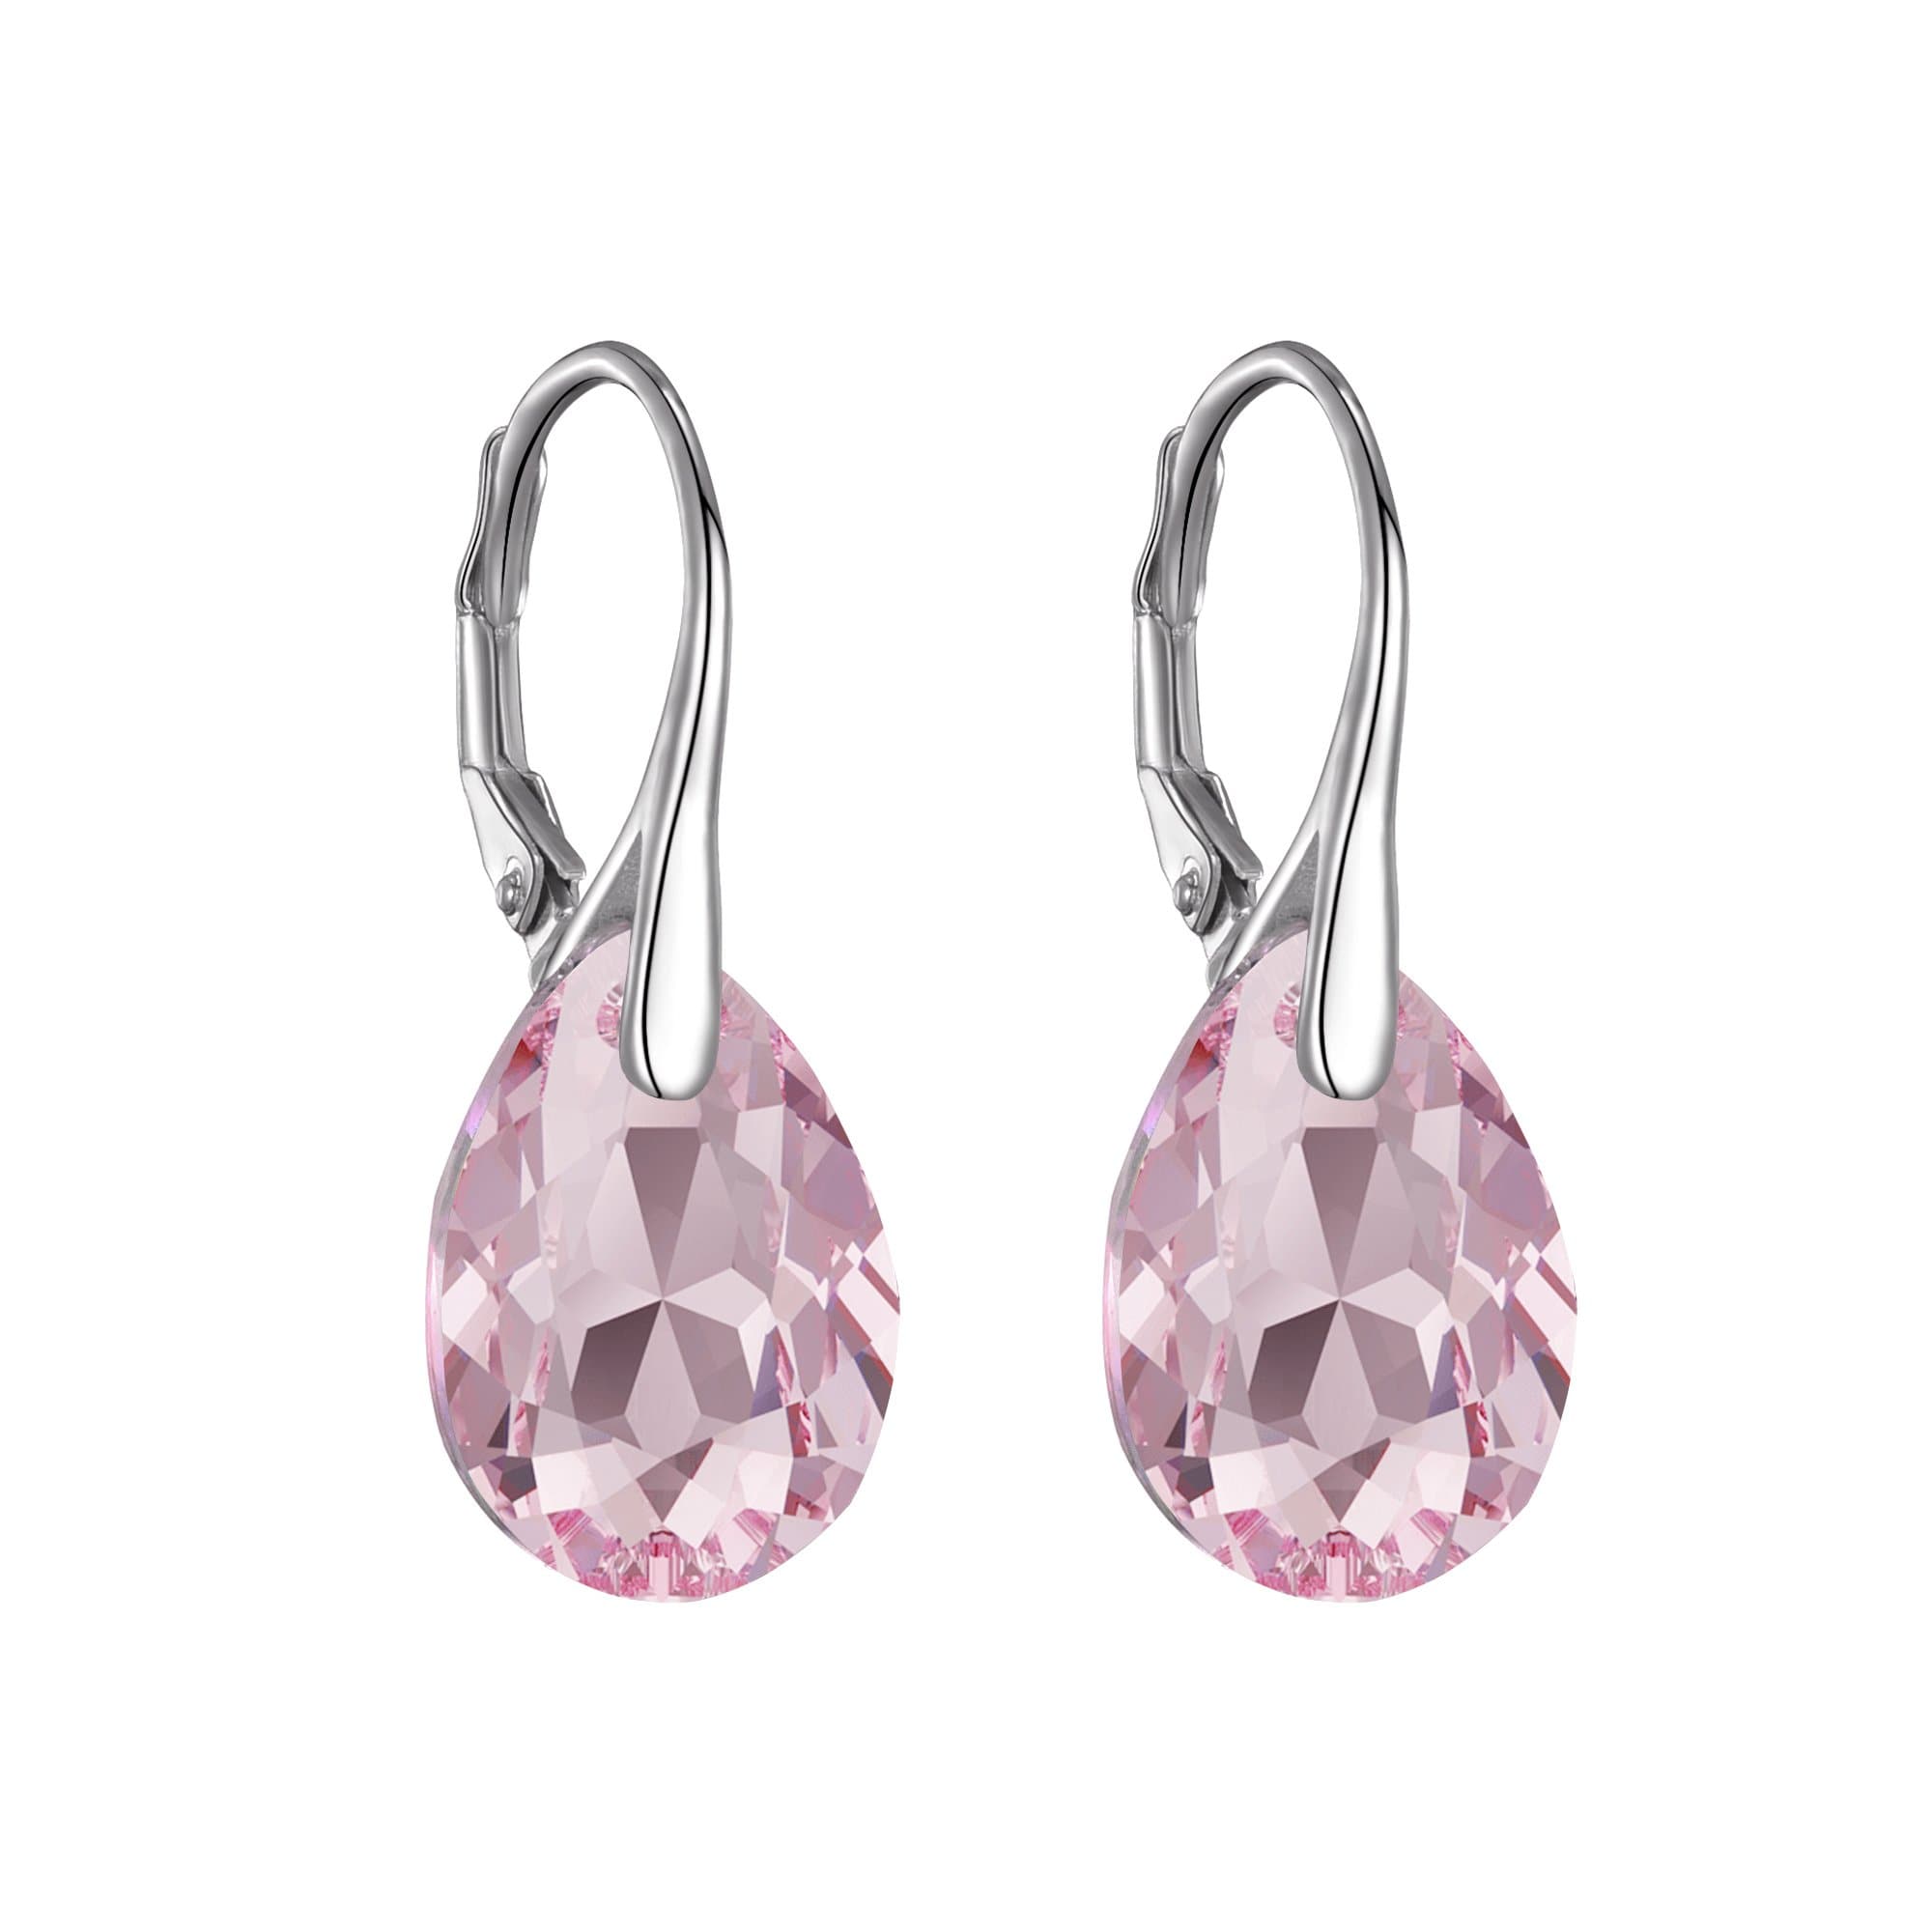 Sterling Silver Light Rose Drop Earrings Created with Zircondia® Crystals by Philip Jones Jewellery